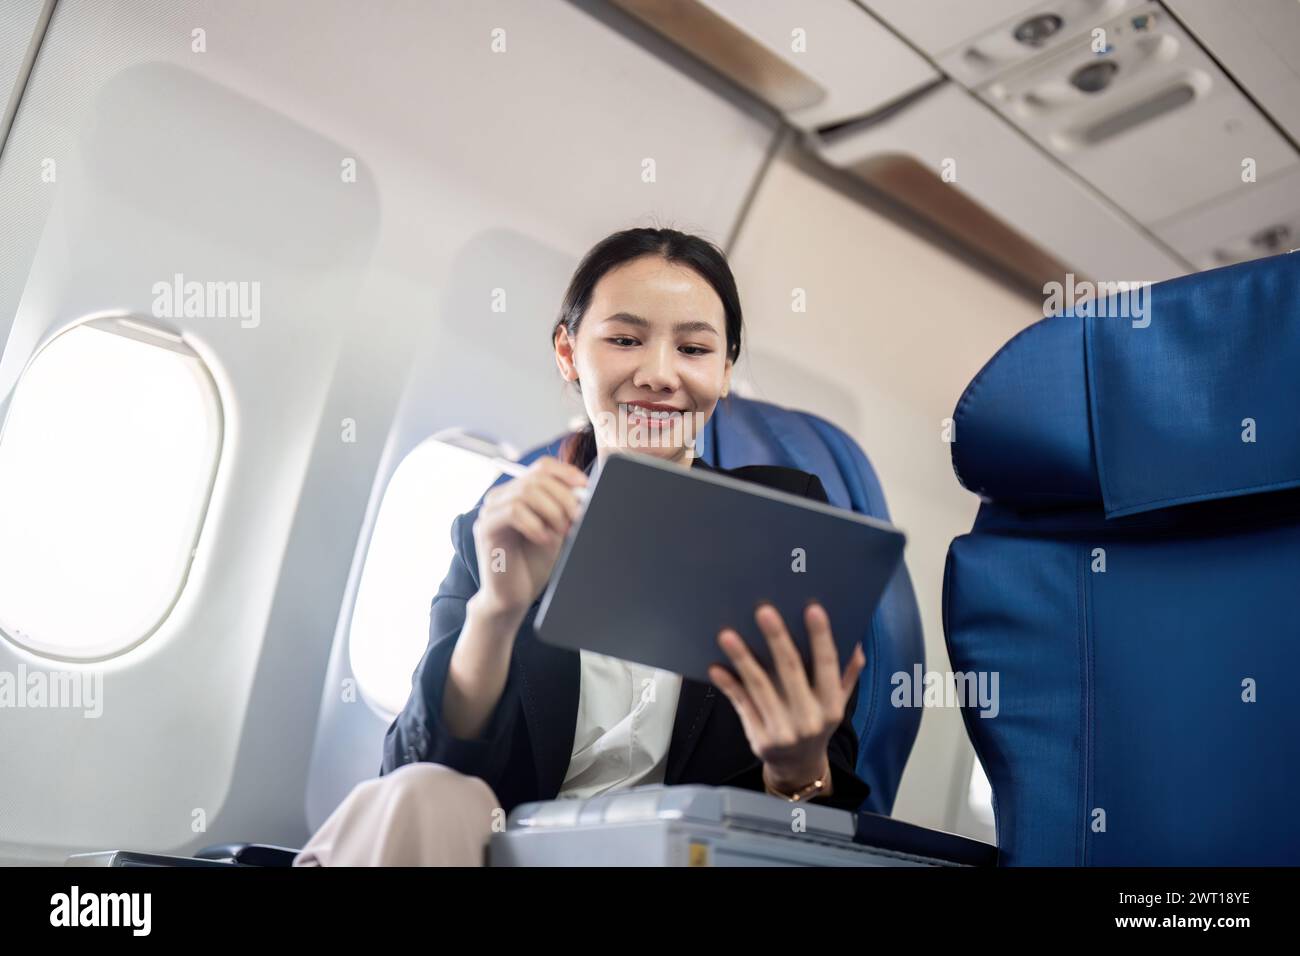 Smiling happy business woman asian flying and working in an airplane in first class, Woman sitting inside an airplane using digital tablet Stock Photo